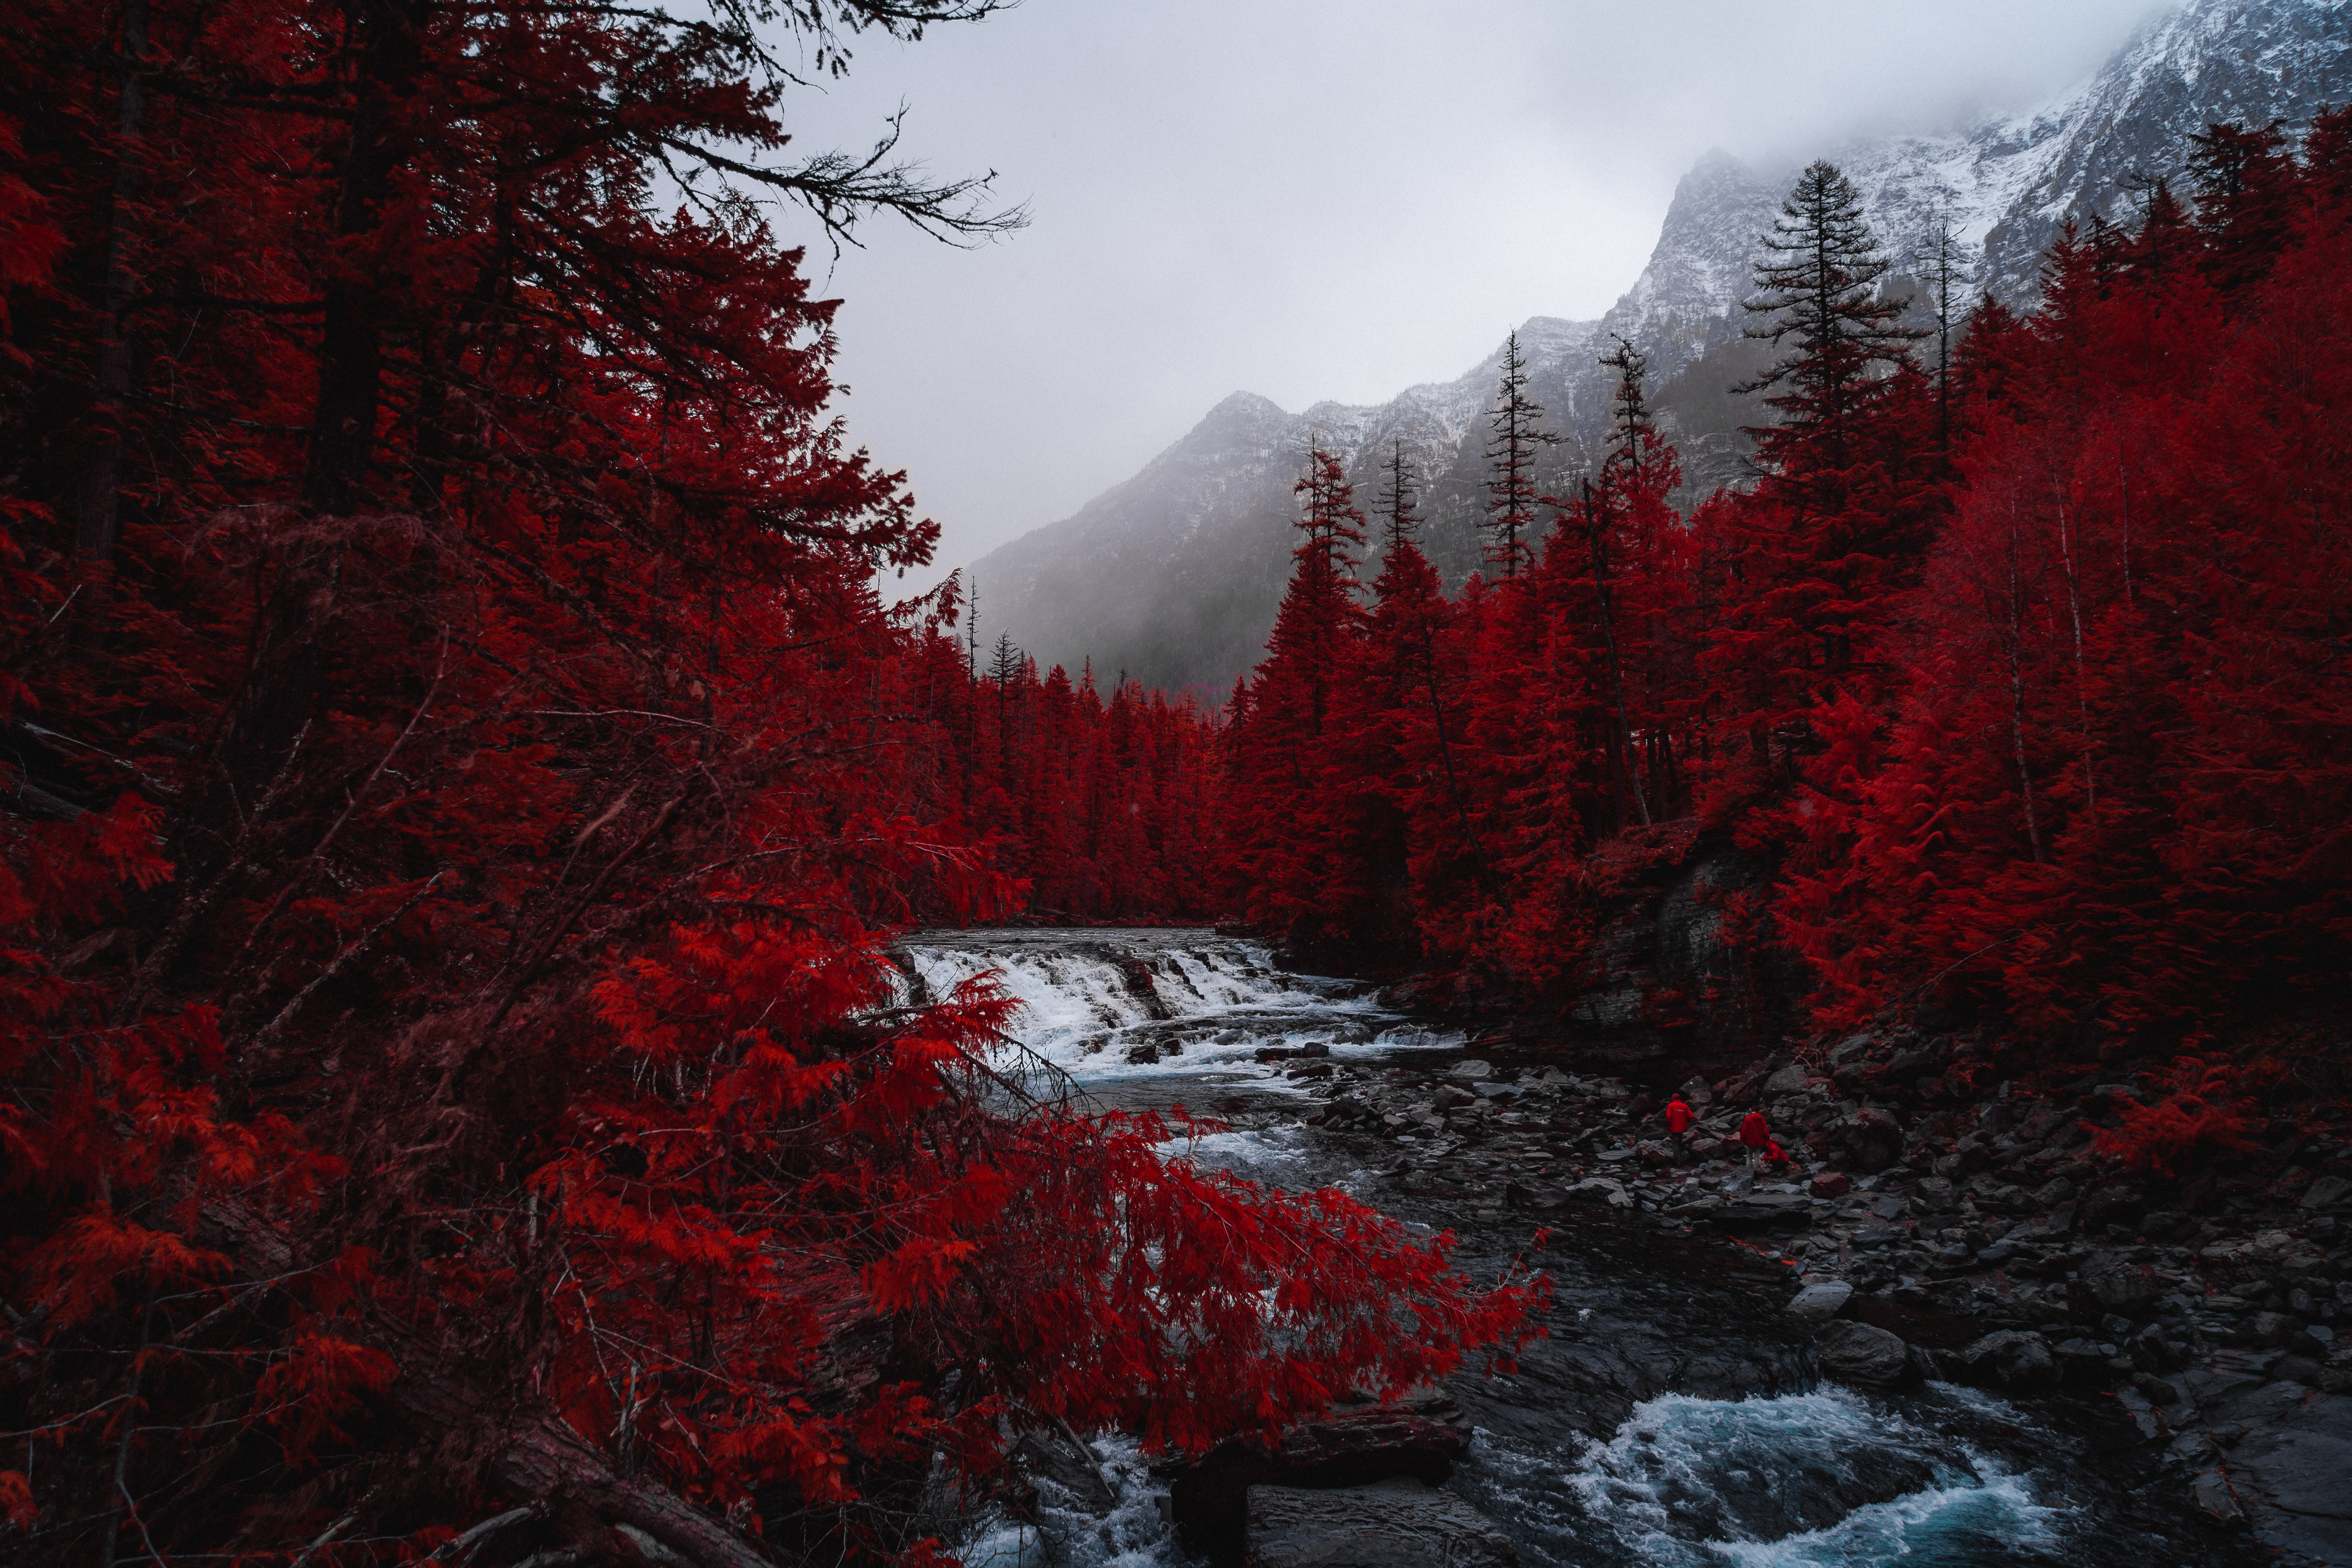 rivers, red, nature, fog, landscape, trees, mountains